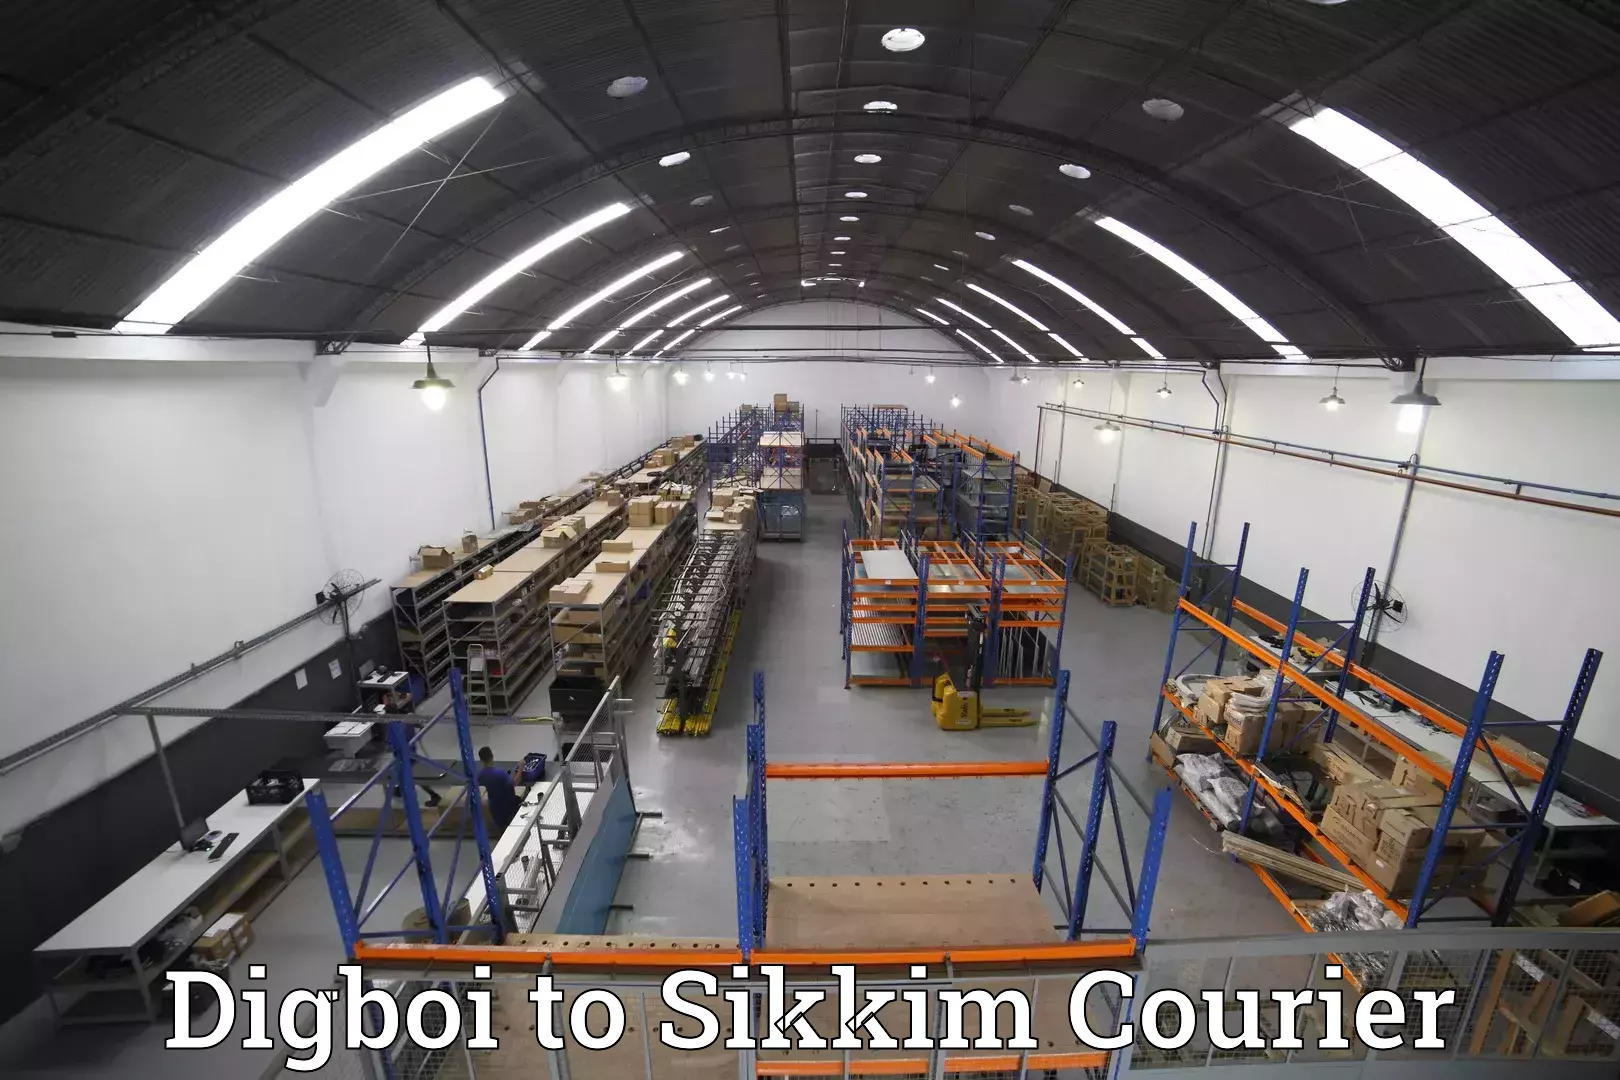 Luggage shipping specialists Digboi to Sikkim